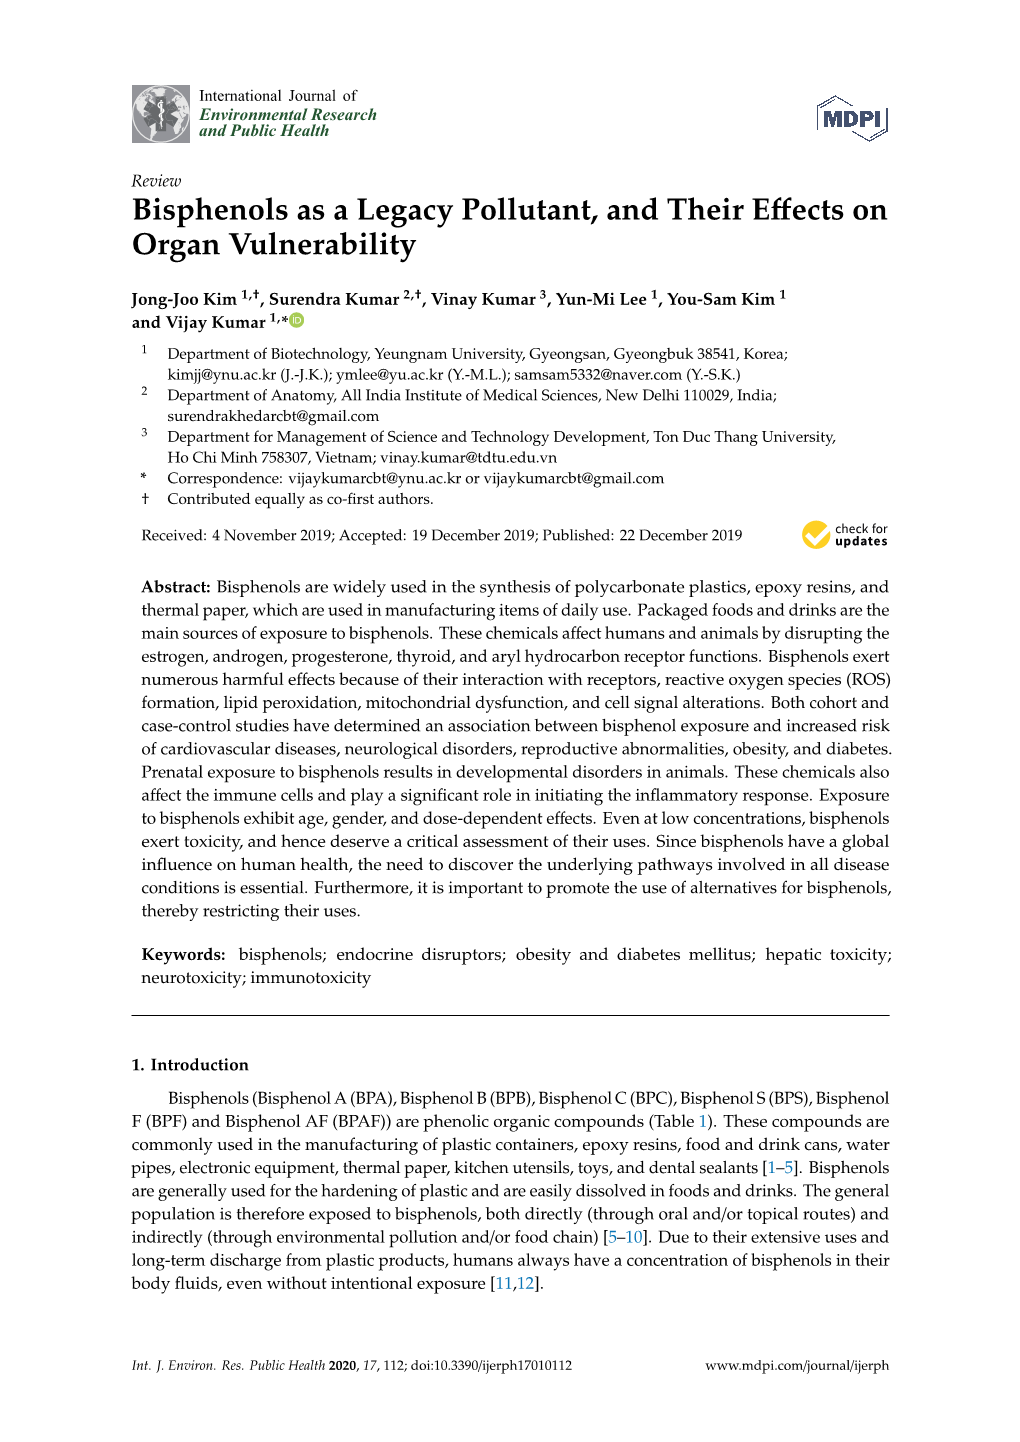 Bisphenols As a Legacy Pollutant, and Their Effects on Organ Vulnerability